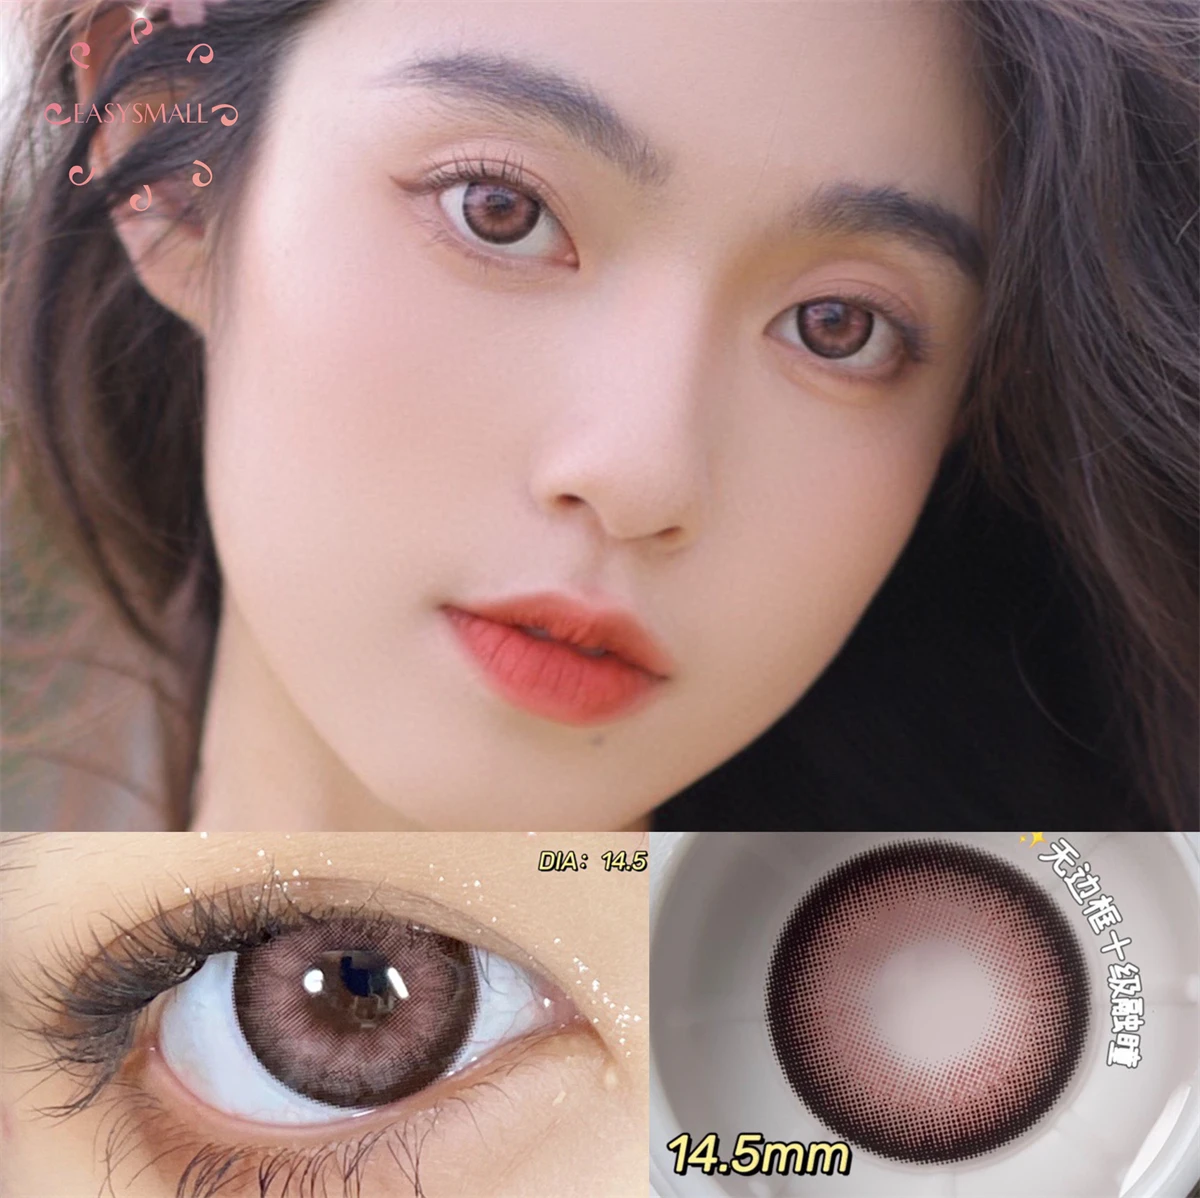 

Easysmall Thai pink crazy Colored Big beauty Pupil Contact Lenses for Eyes Degree yearly 2pcs/pair Prescription myopia